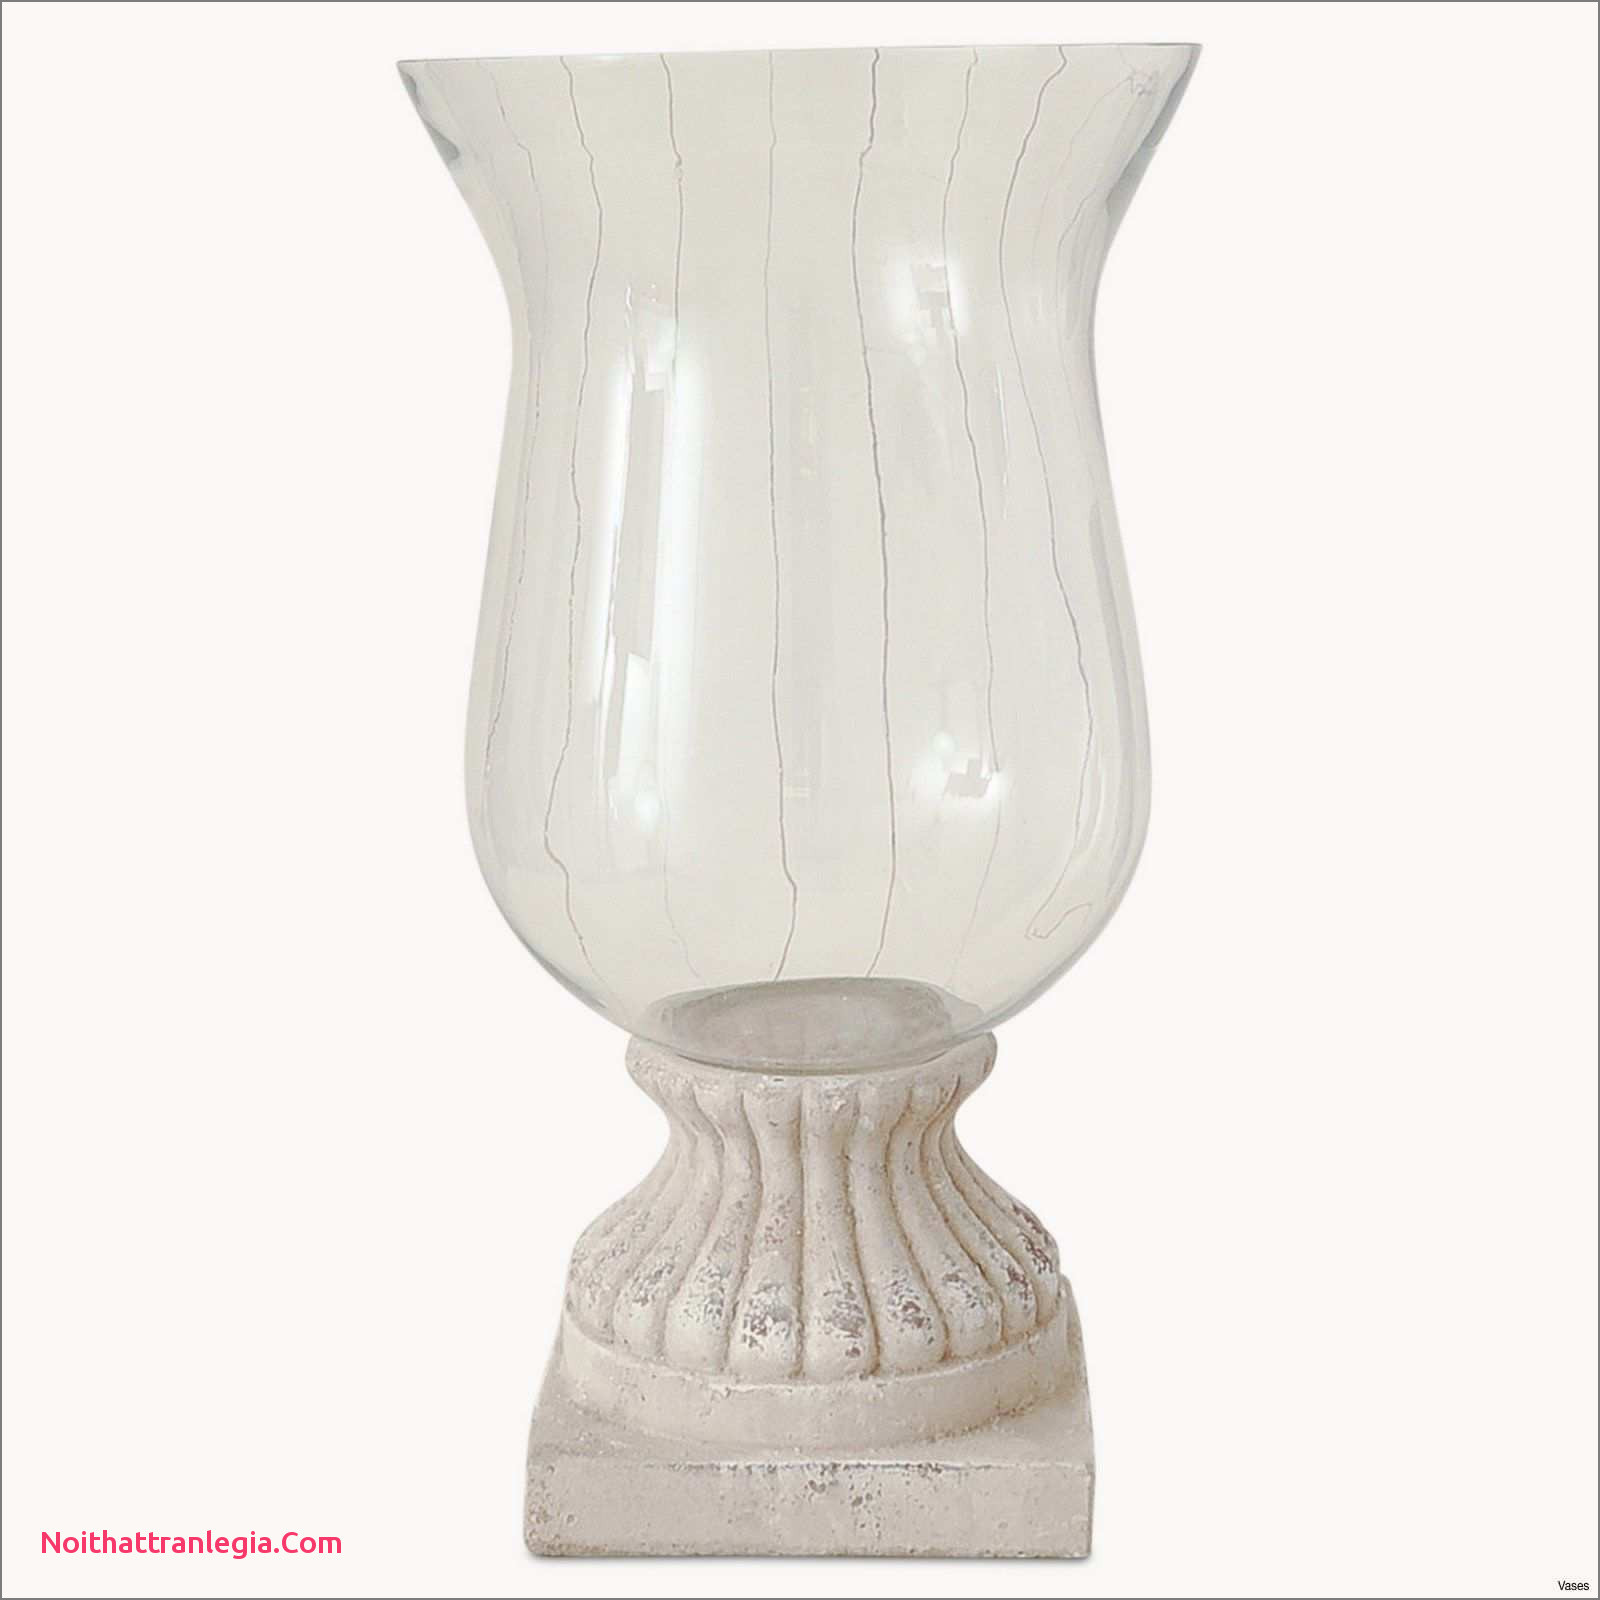 12 Popular Old Vases for Sale 2024 free download old vases for sale of 20 how to make mercury glass vases noithattranlegia vases design throughout vase lighting base gallery gold table lamp base fresh how to make a table lamp 10h